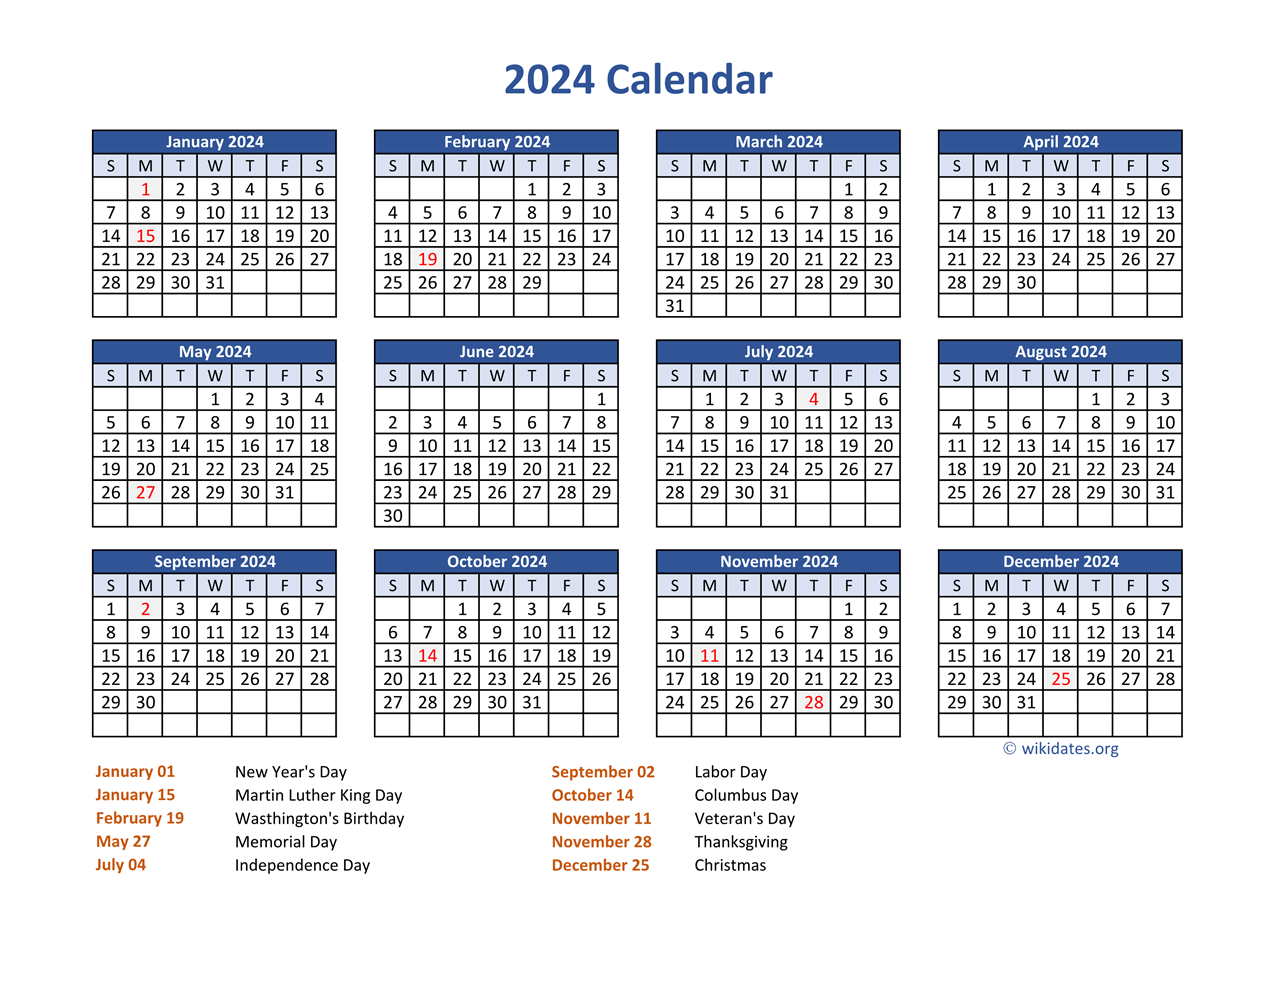 Pdf Calendar 2024 With Federal Holidays | Wikidates for 2024 Calendar With Holidays Printable Free